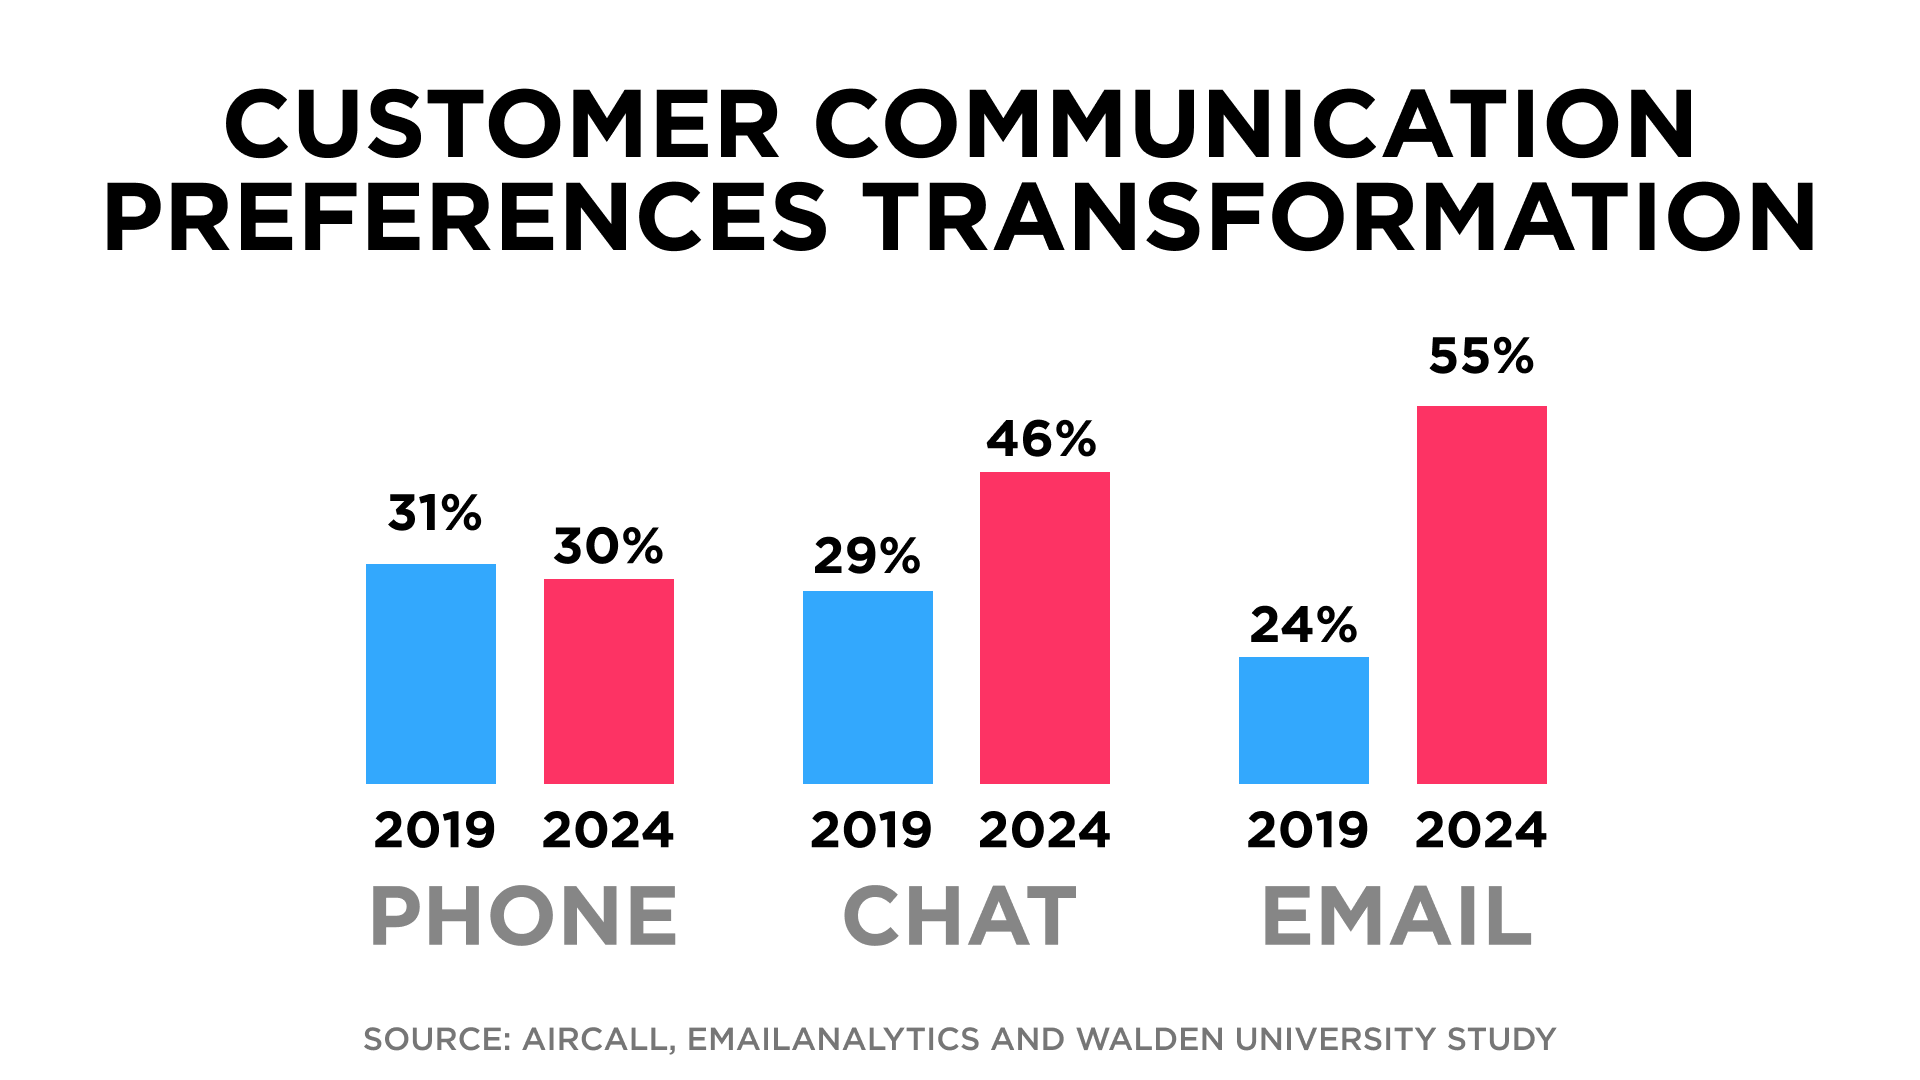 Communication Preference Transformation: 2019 to 2024